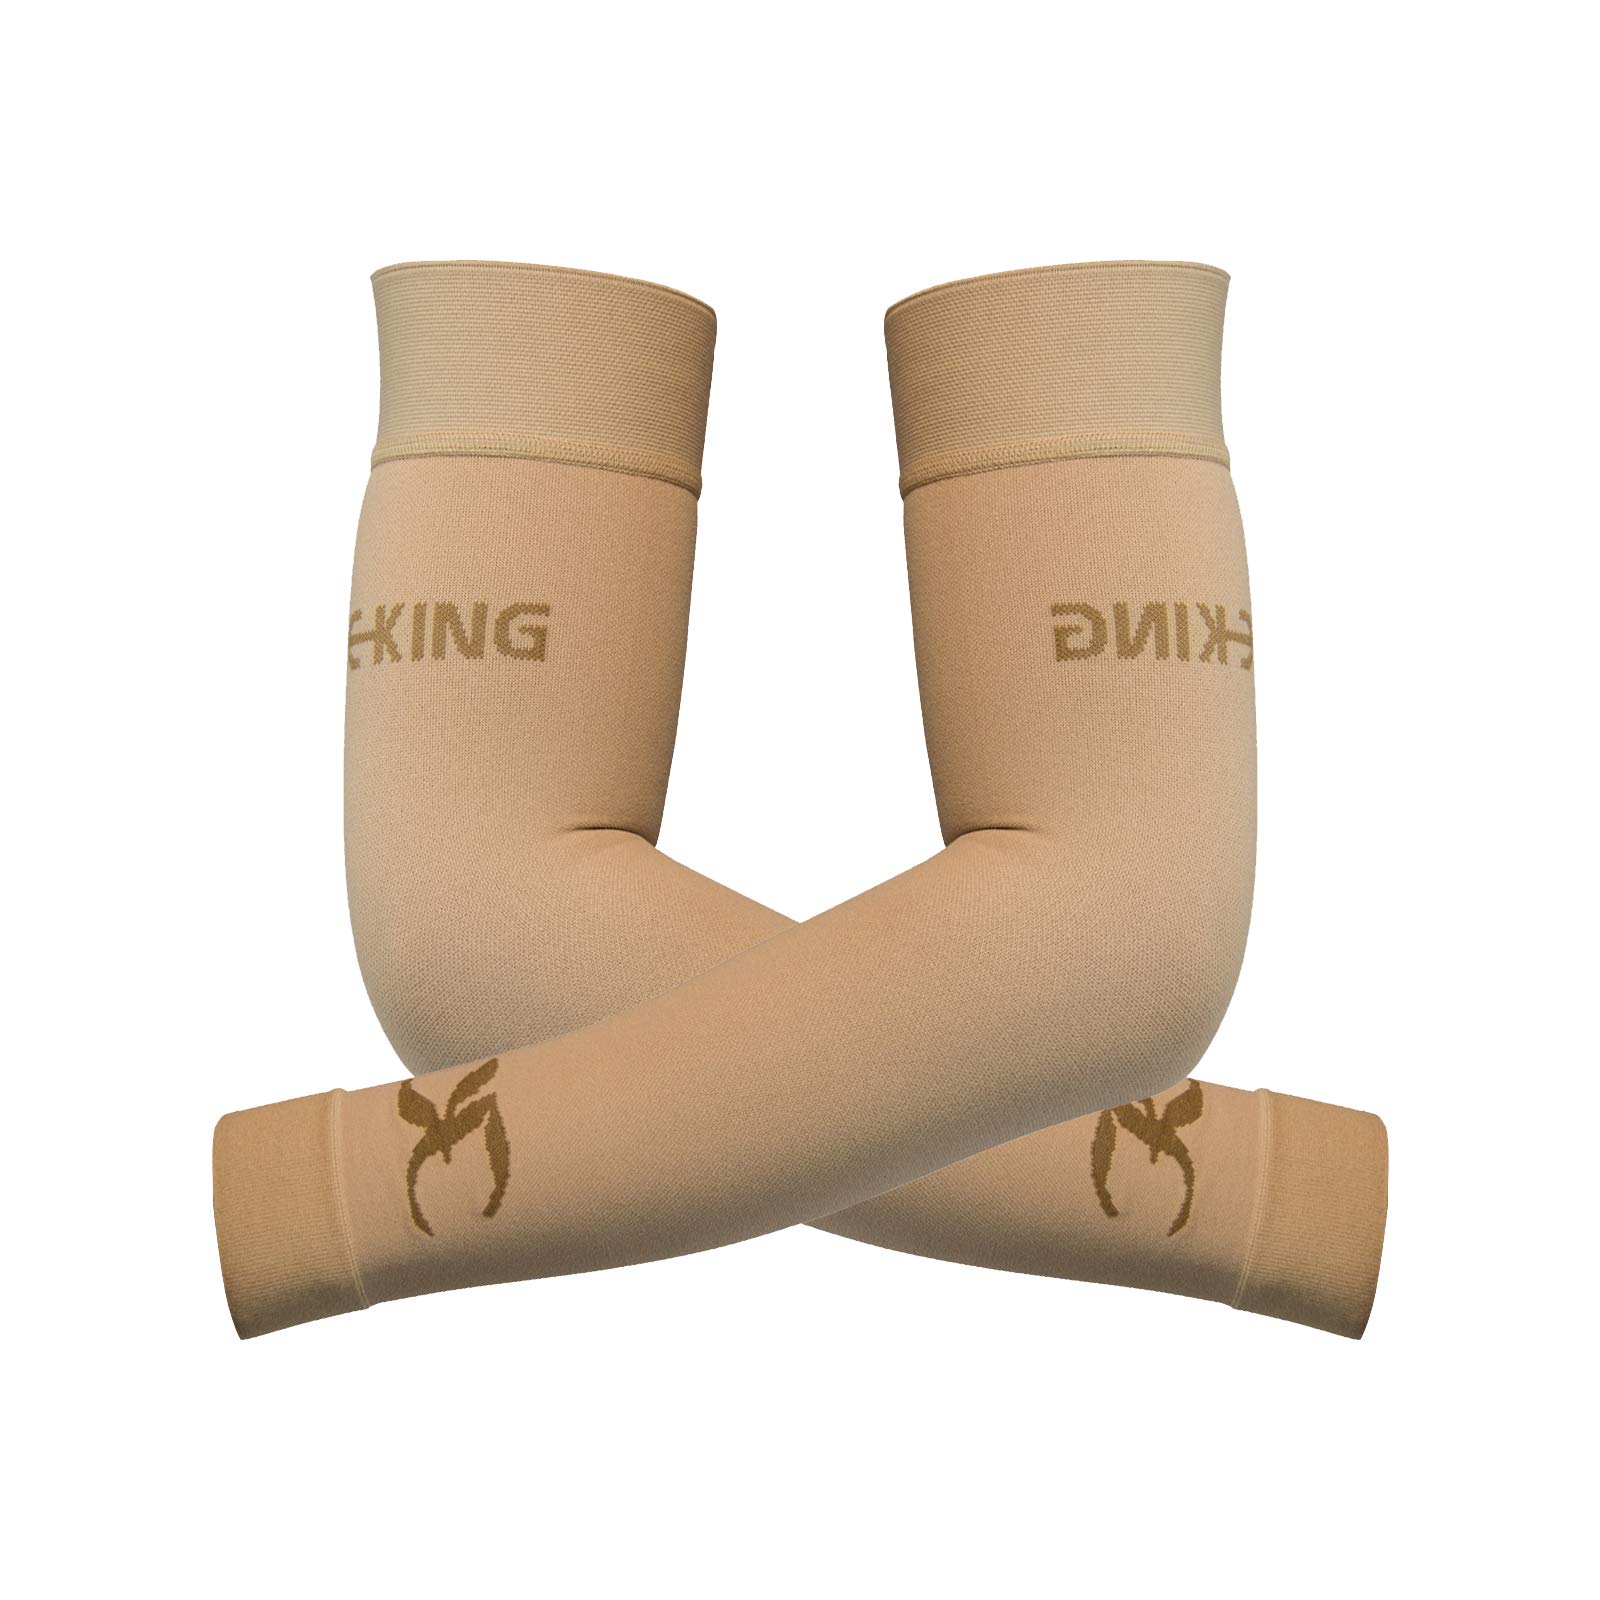 KEKING Lymphedema Compression Arm Sleeves for Men Women (Pair), No Silicone  Dot, 15-20 mmHg Compression Full Arm Support for Lipedema, Edema, Post  Surgery Recovery, Swelling, Pain Relief, Beige M Medium (1 Pair) 15-20mmhg